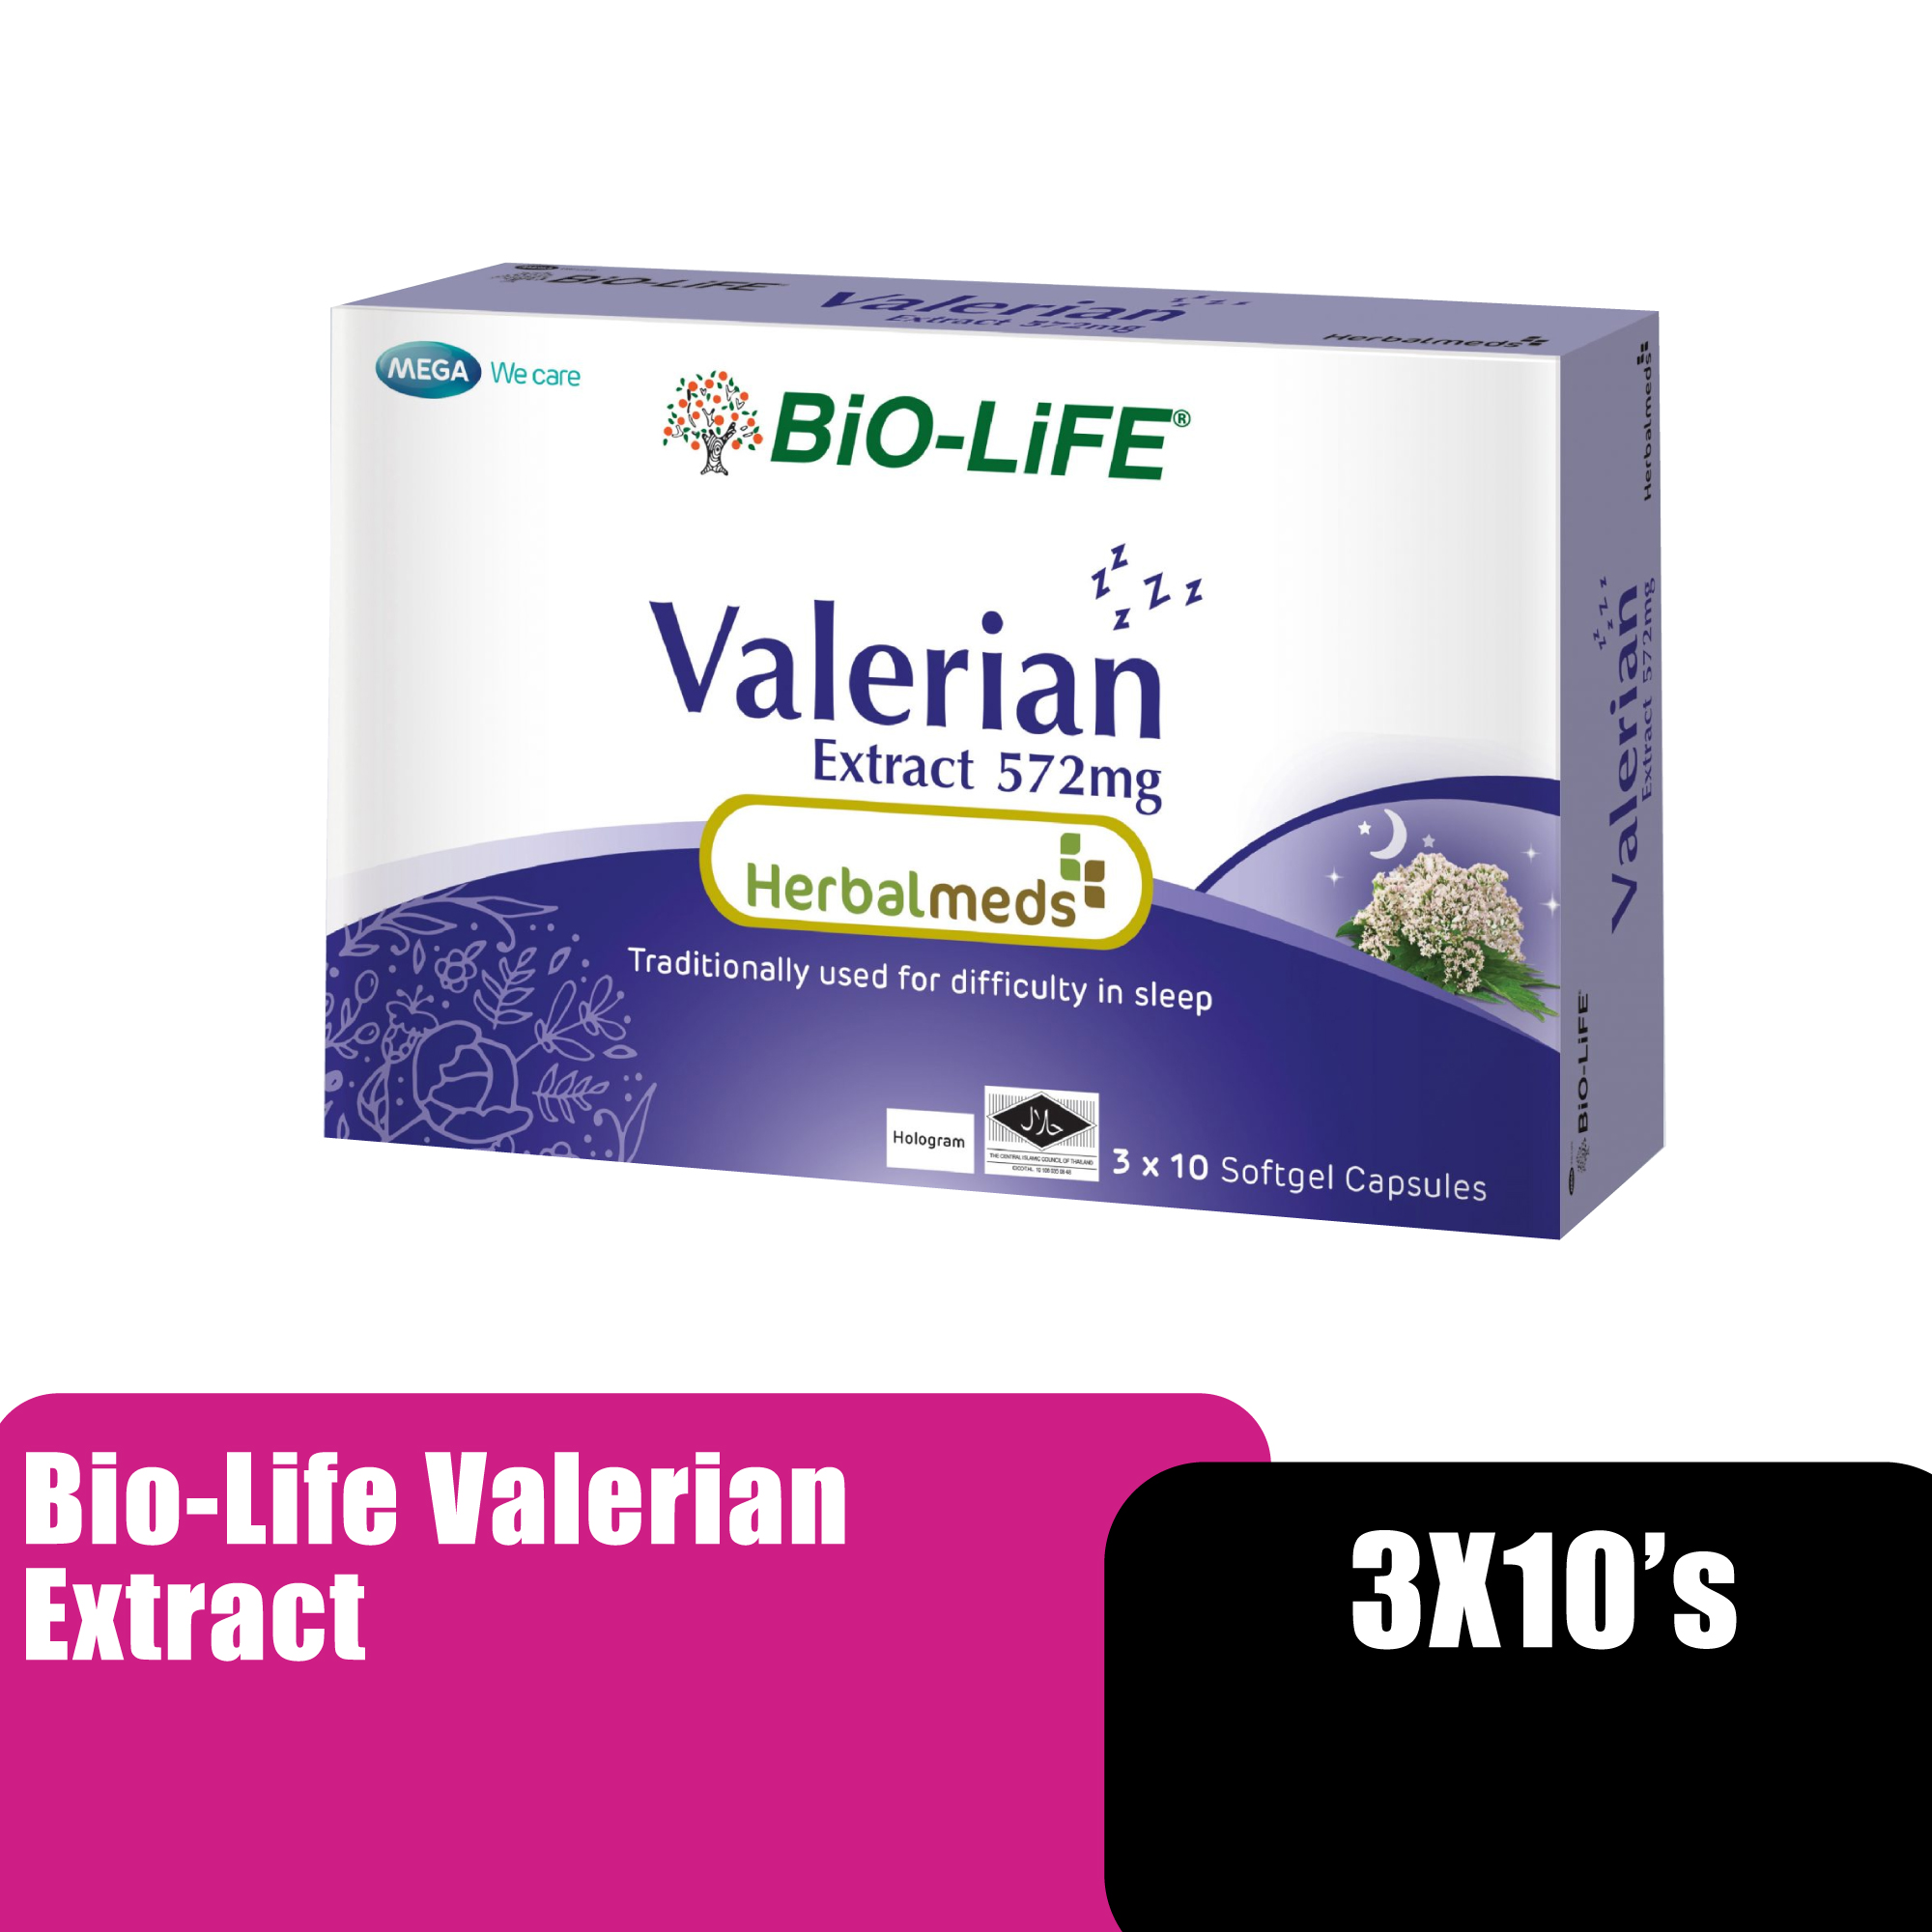 Bio-Life Valerian Extract With Herbalmeds 30's (Supplement for sleep quality)